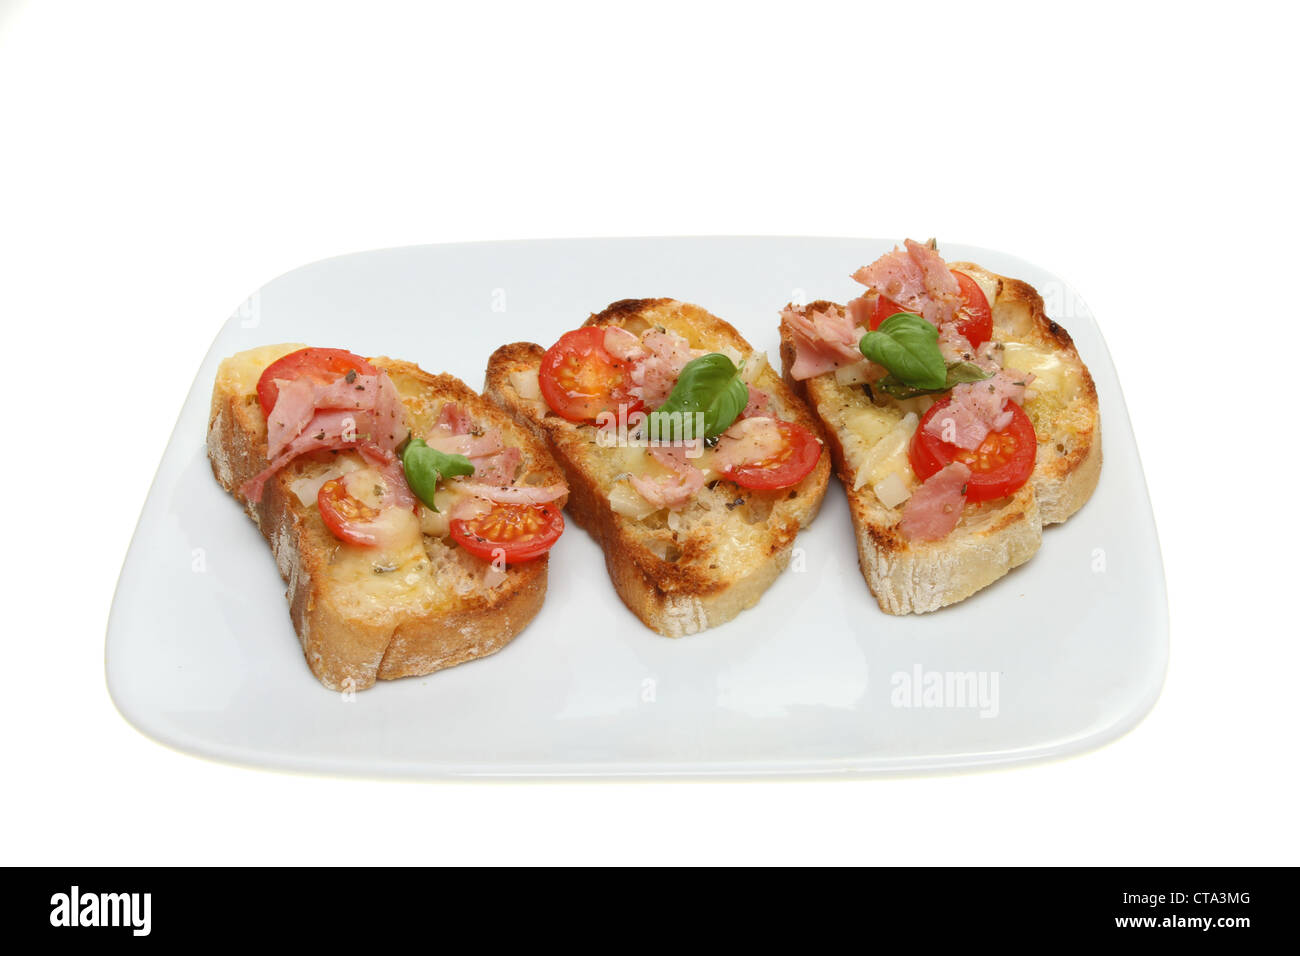 Toasted savory snack, cheese,ham, tomato and basil on ciabata bread on a plate isolated against white Stock Photo